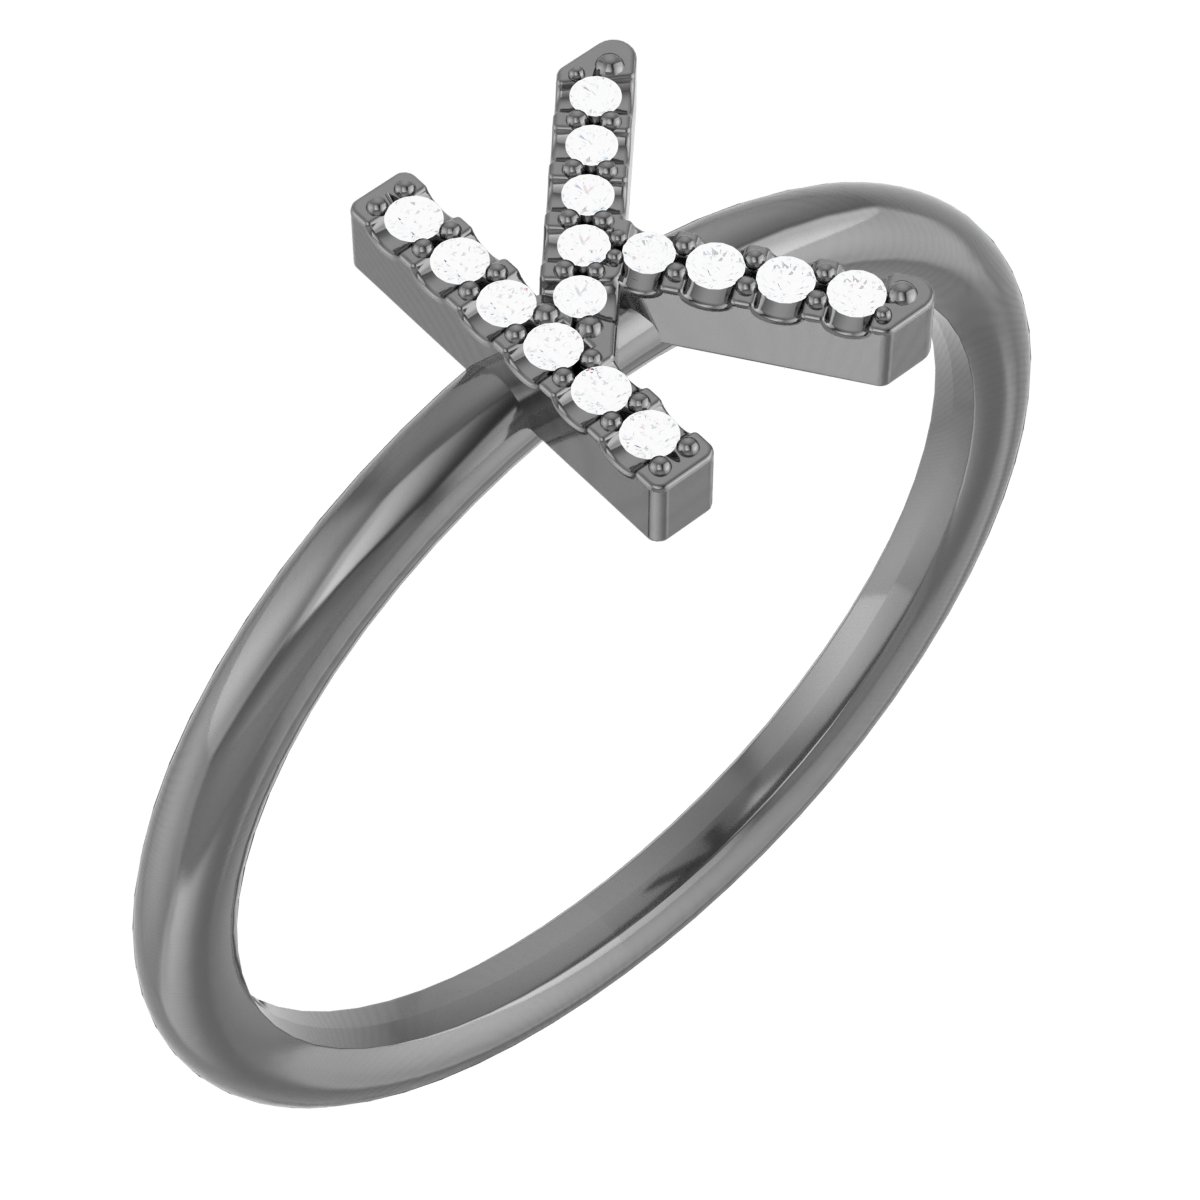 Sterling Silver .06 CTW Diamond Initial K Ring Ref. 15158752